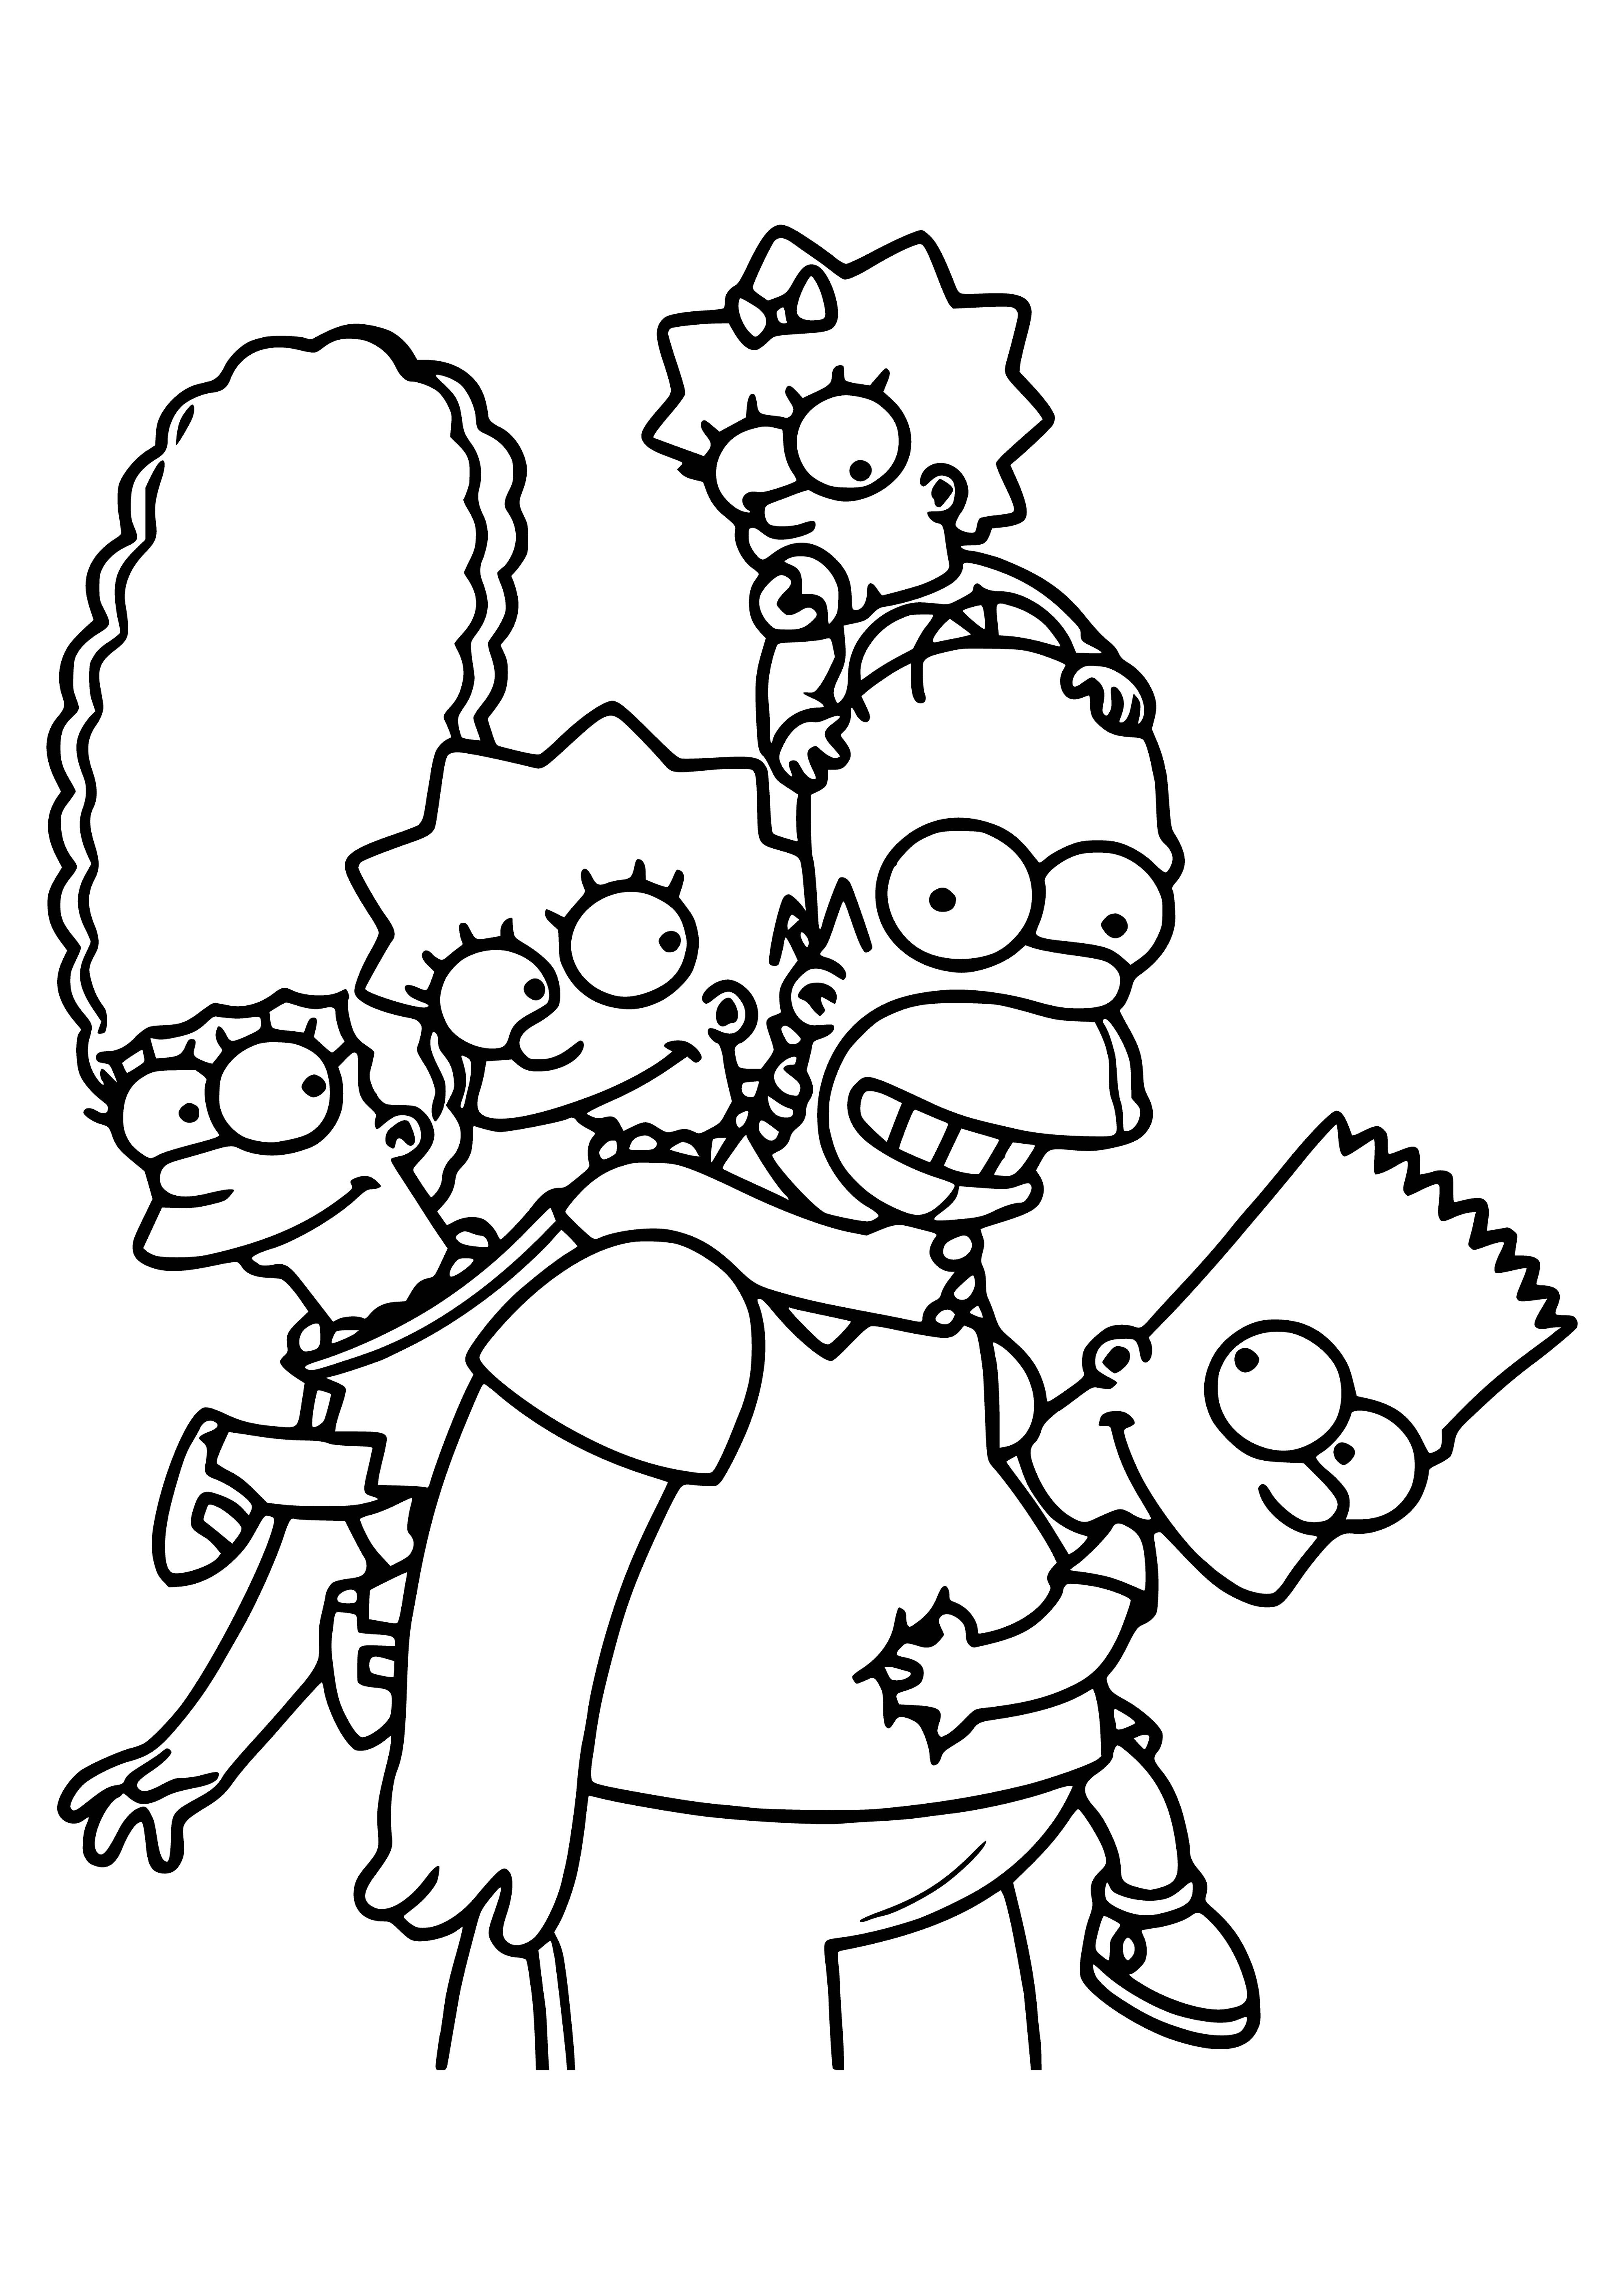 coloring page: The Simpson family is a nuclear family living in Springfield & getting into hilarious/dramatic situations.